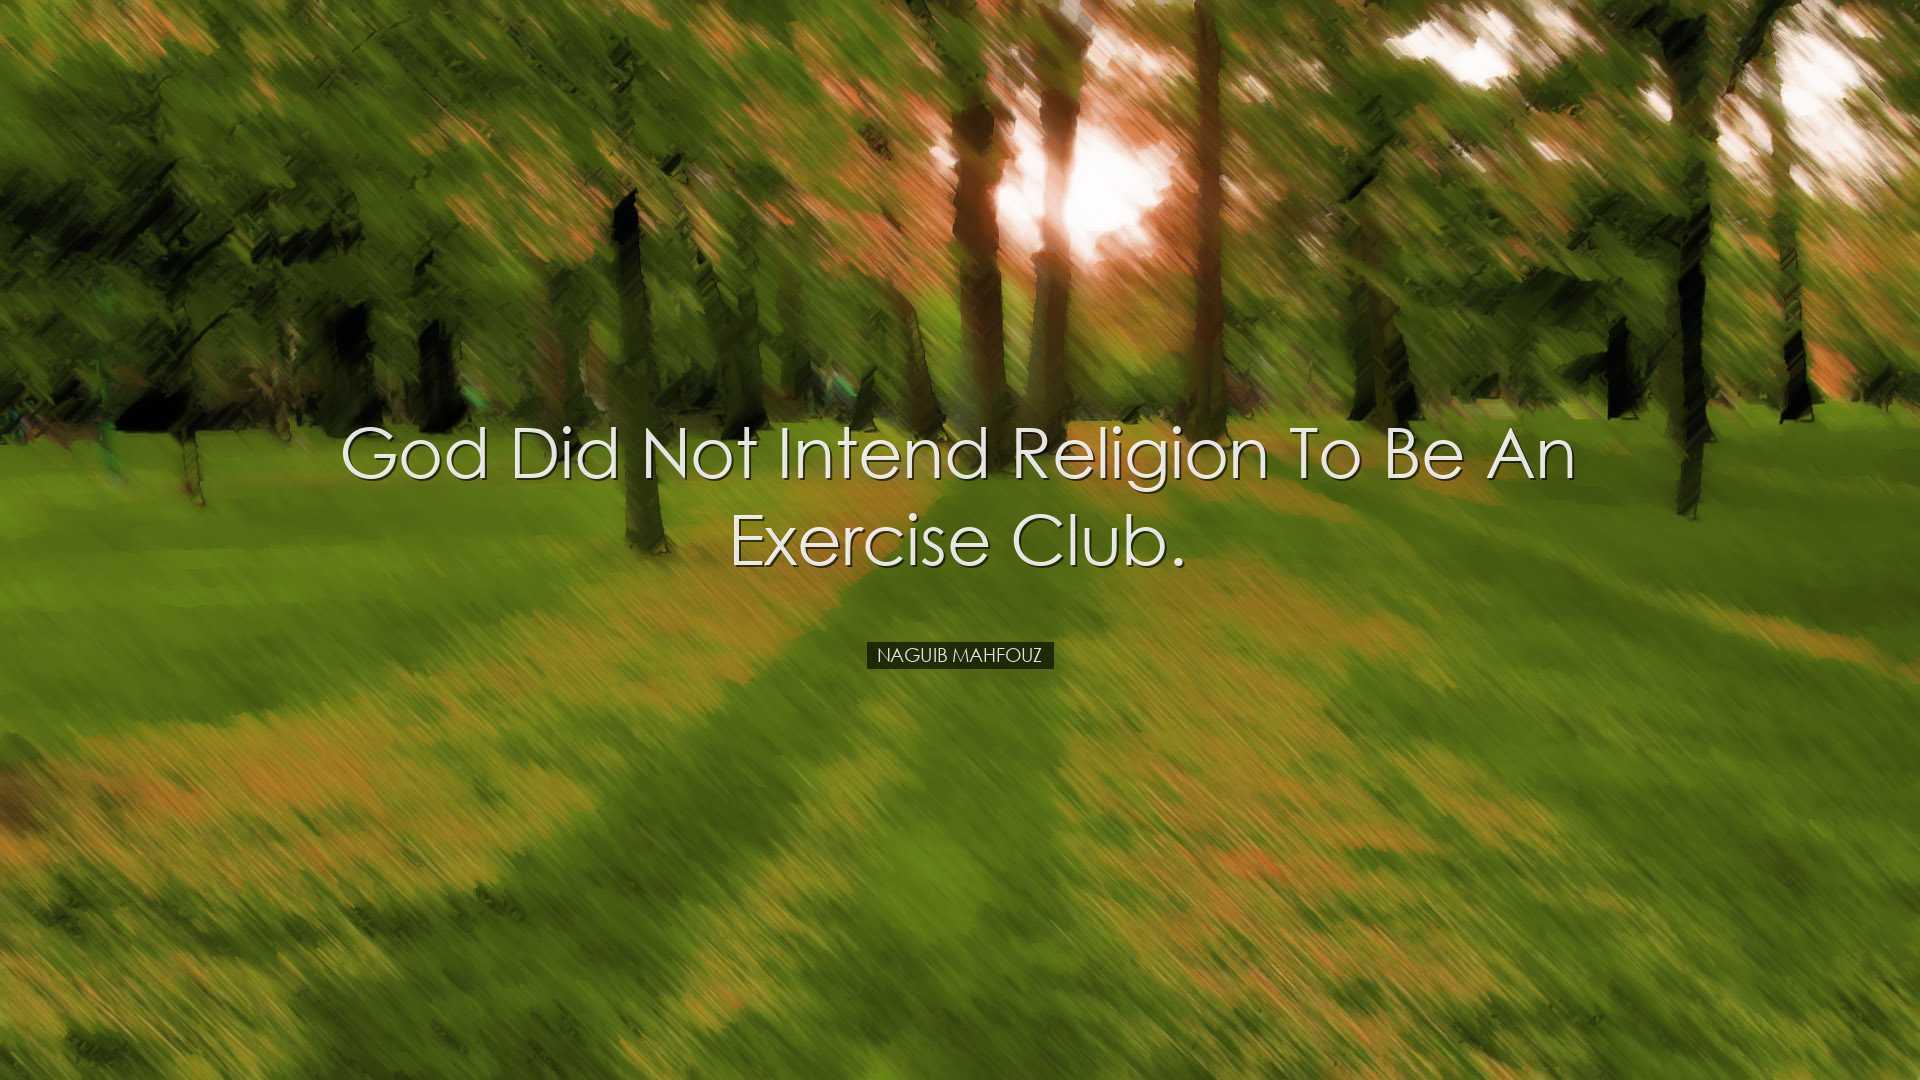 God did not intend religion to be an exercise club. - Naguib Mahfo